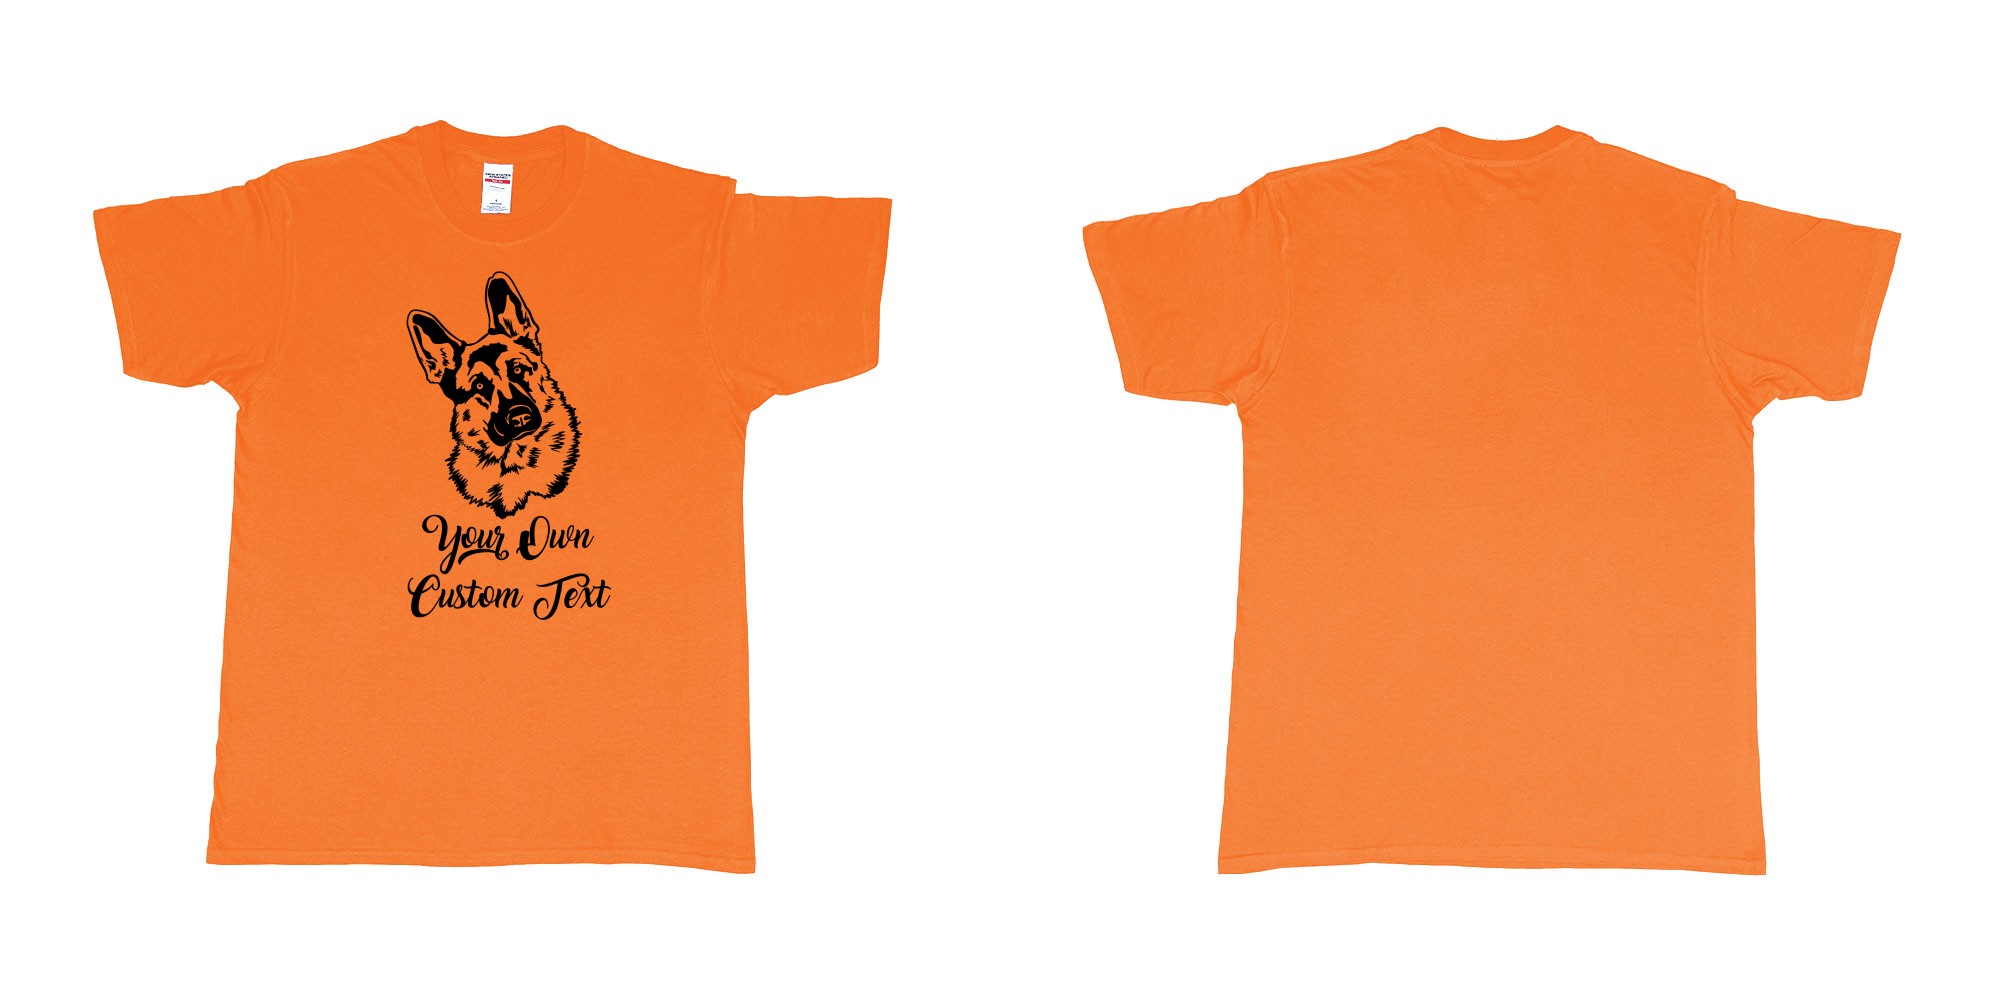 Custom tshirt design zack german shepherd tilts its head your own custom text in fabric color orange choice your own text made in Bali by The Pirate Way